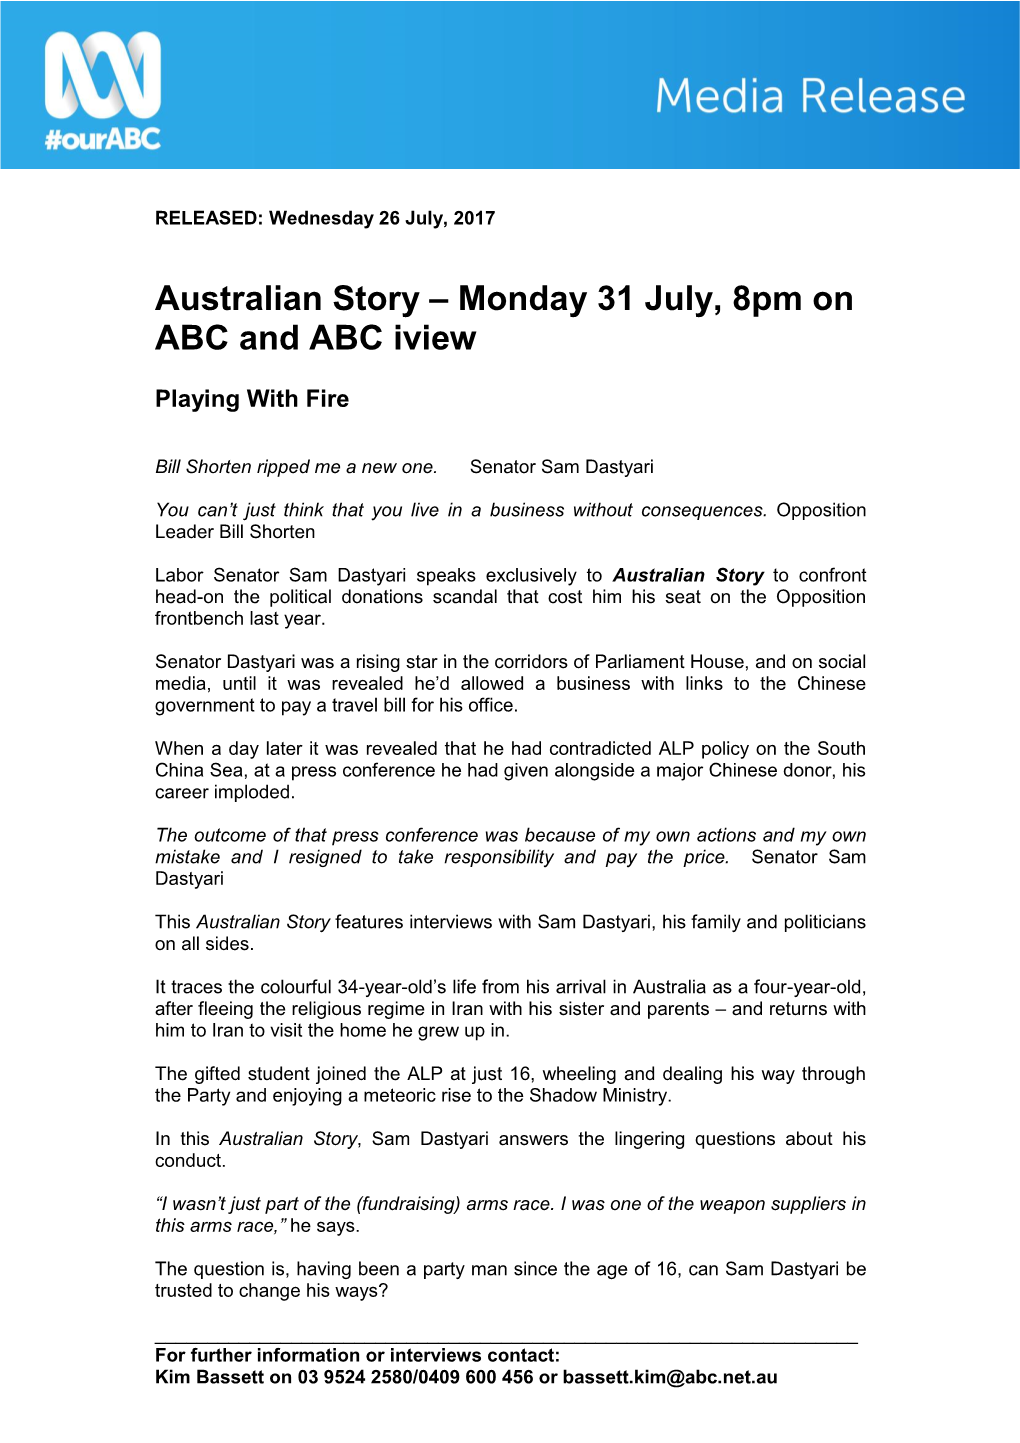 Australian Story – Monday 31 July, 8Pm on ABC and ABC Iview